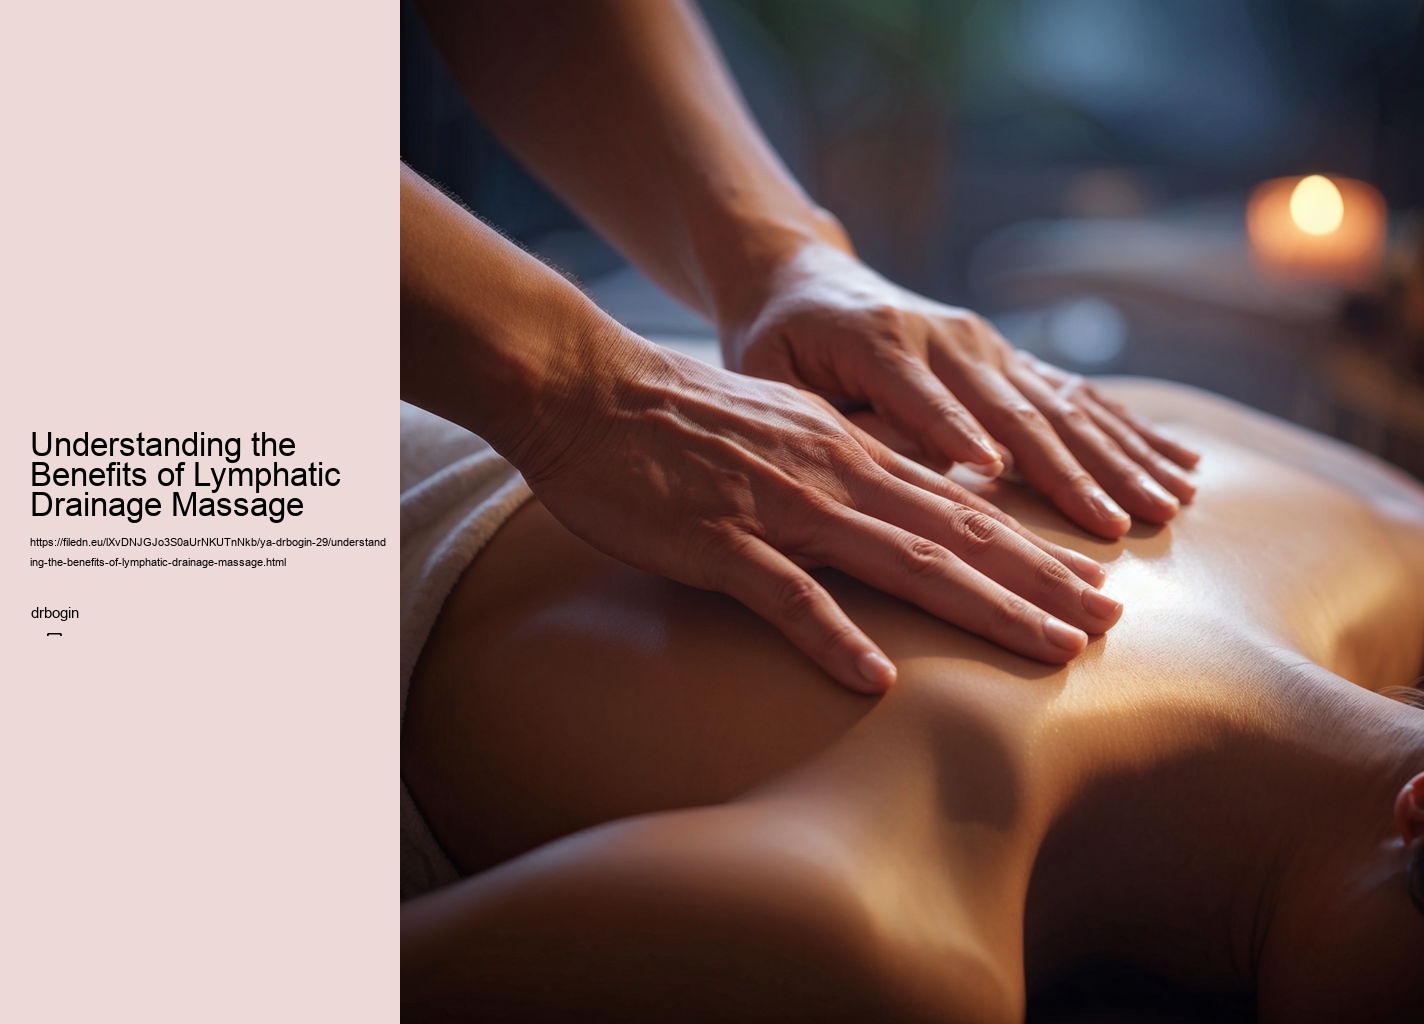 Understanding the Benefits of Lymphatic Drainage Massage